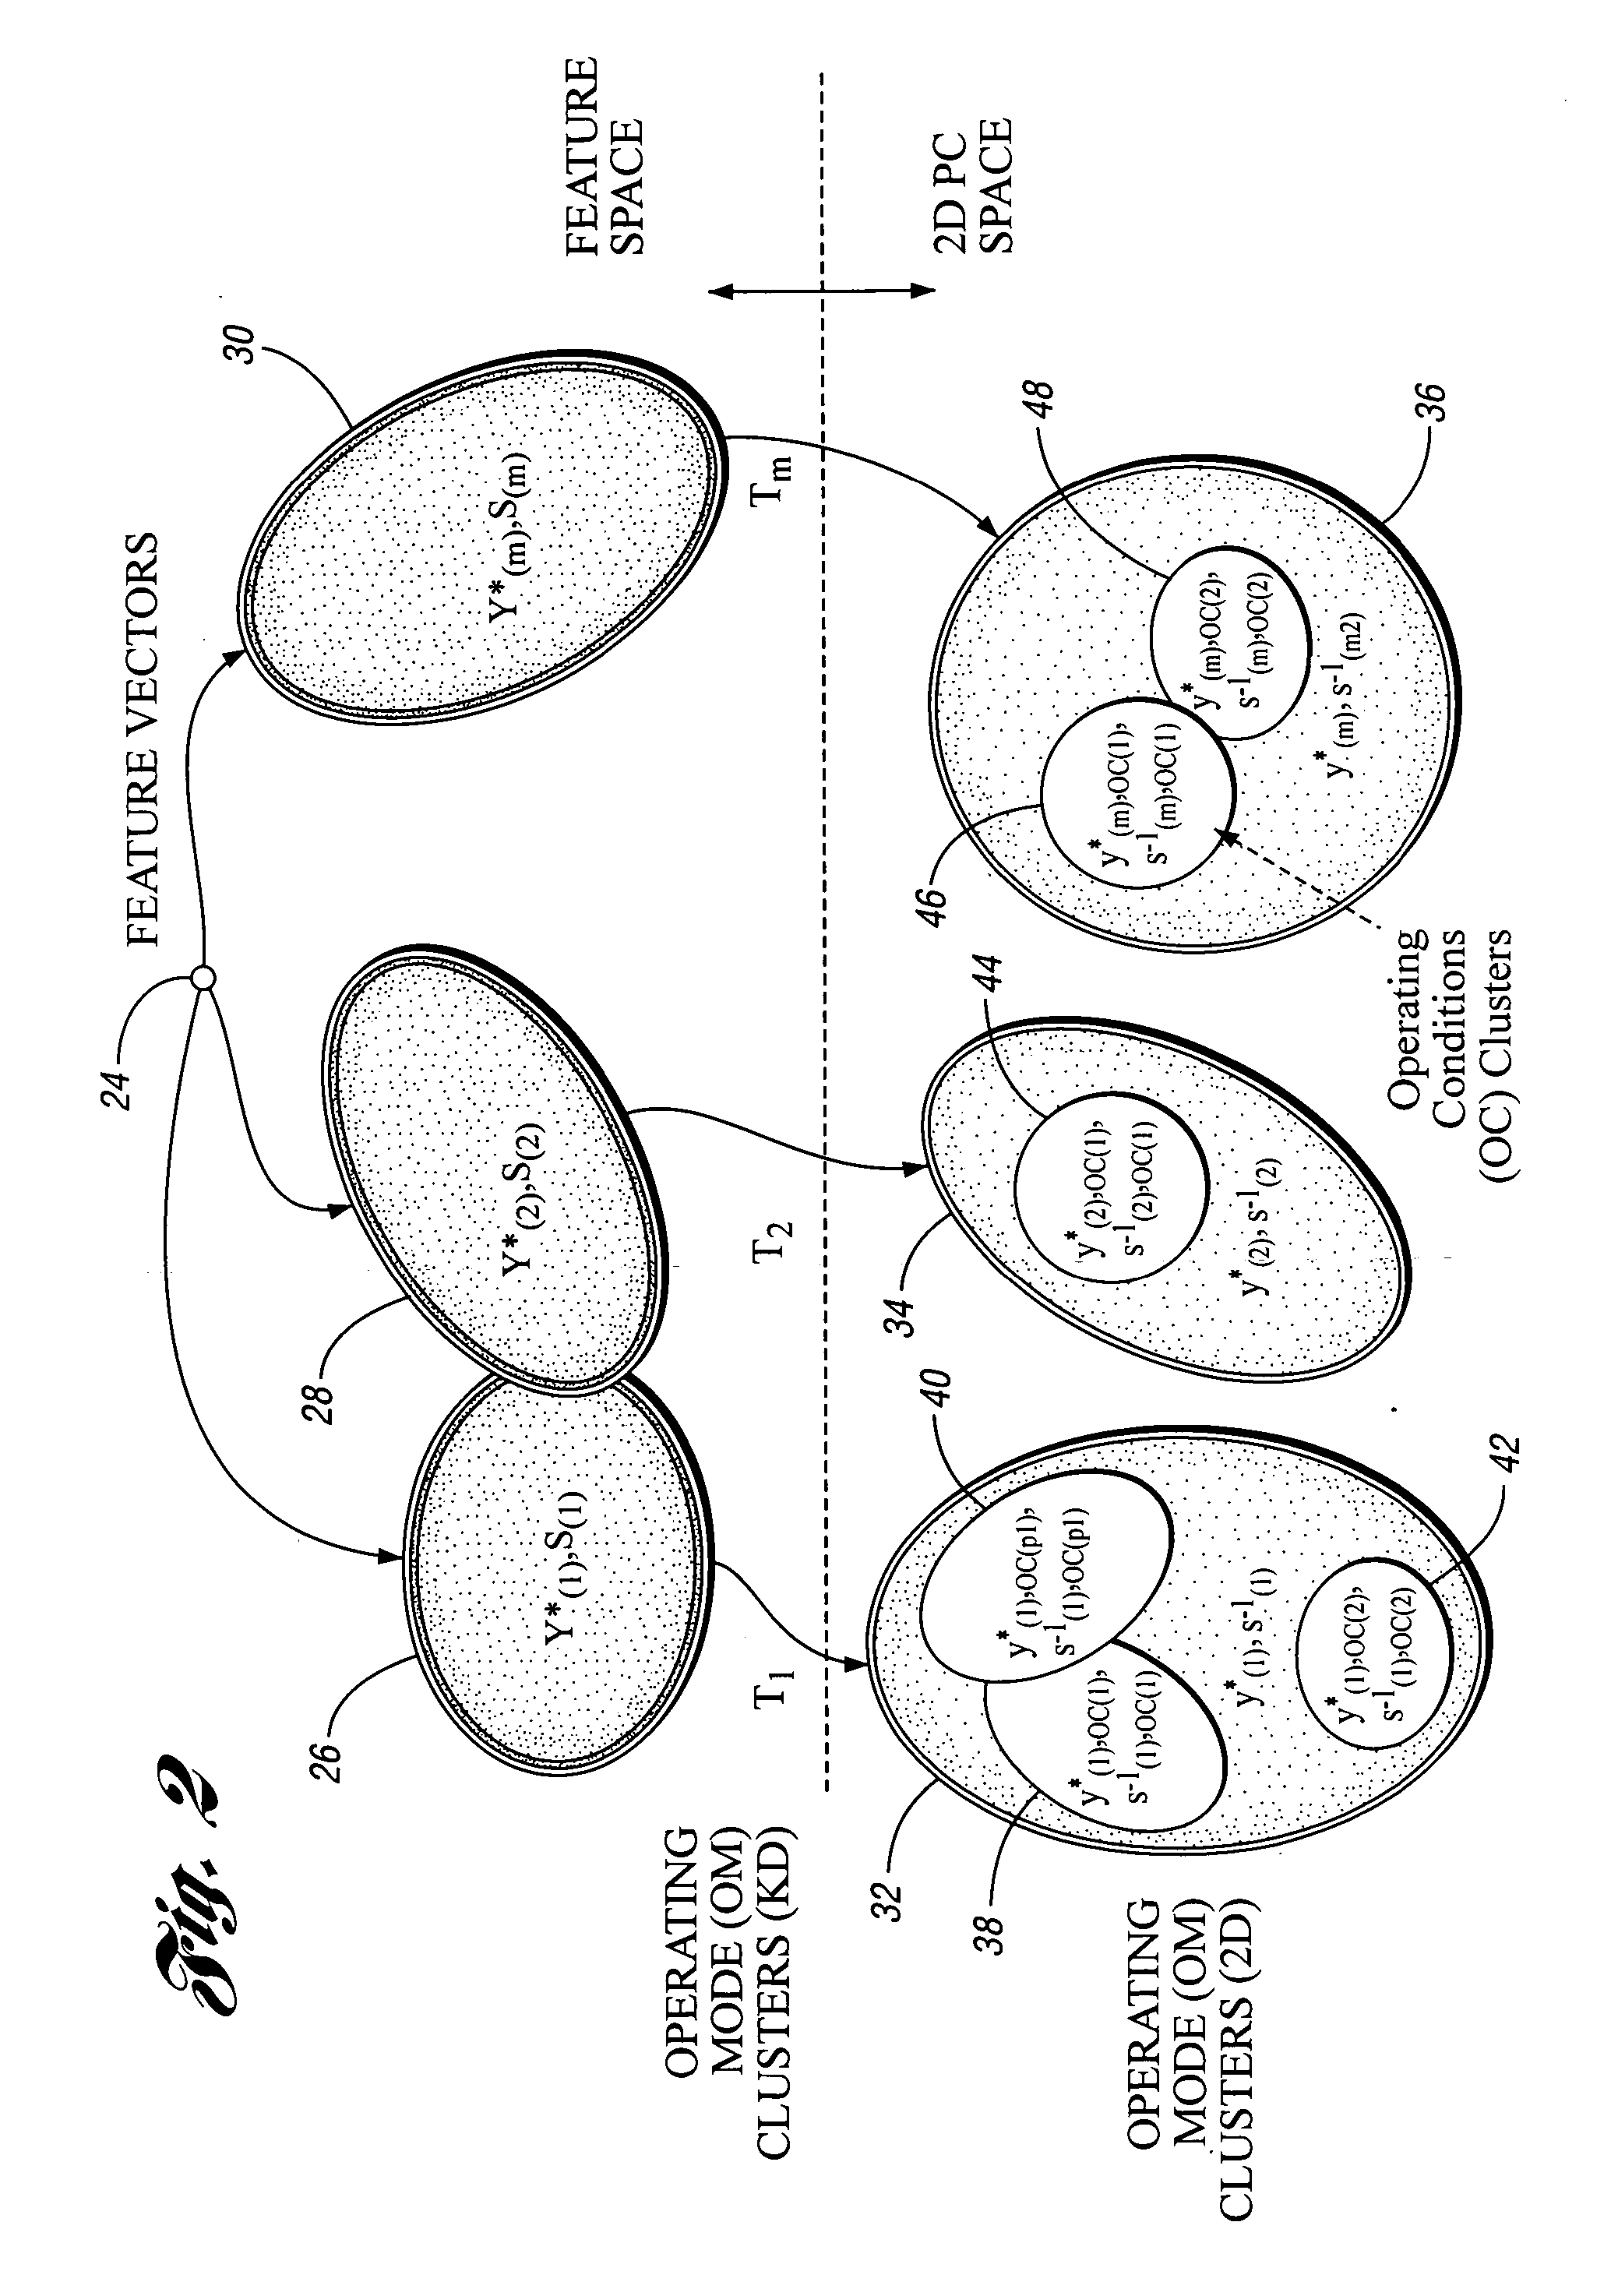 Method for predictive maintenance of a machine